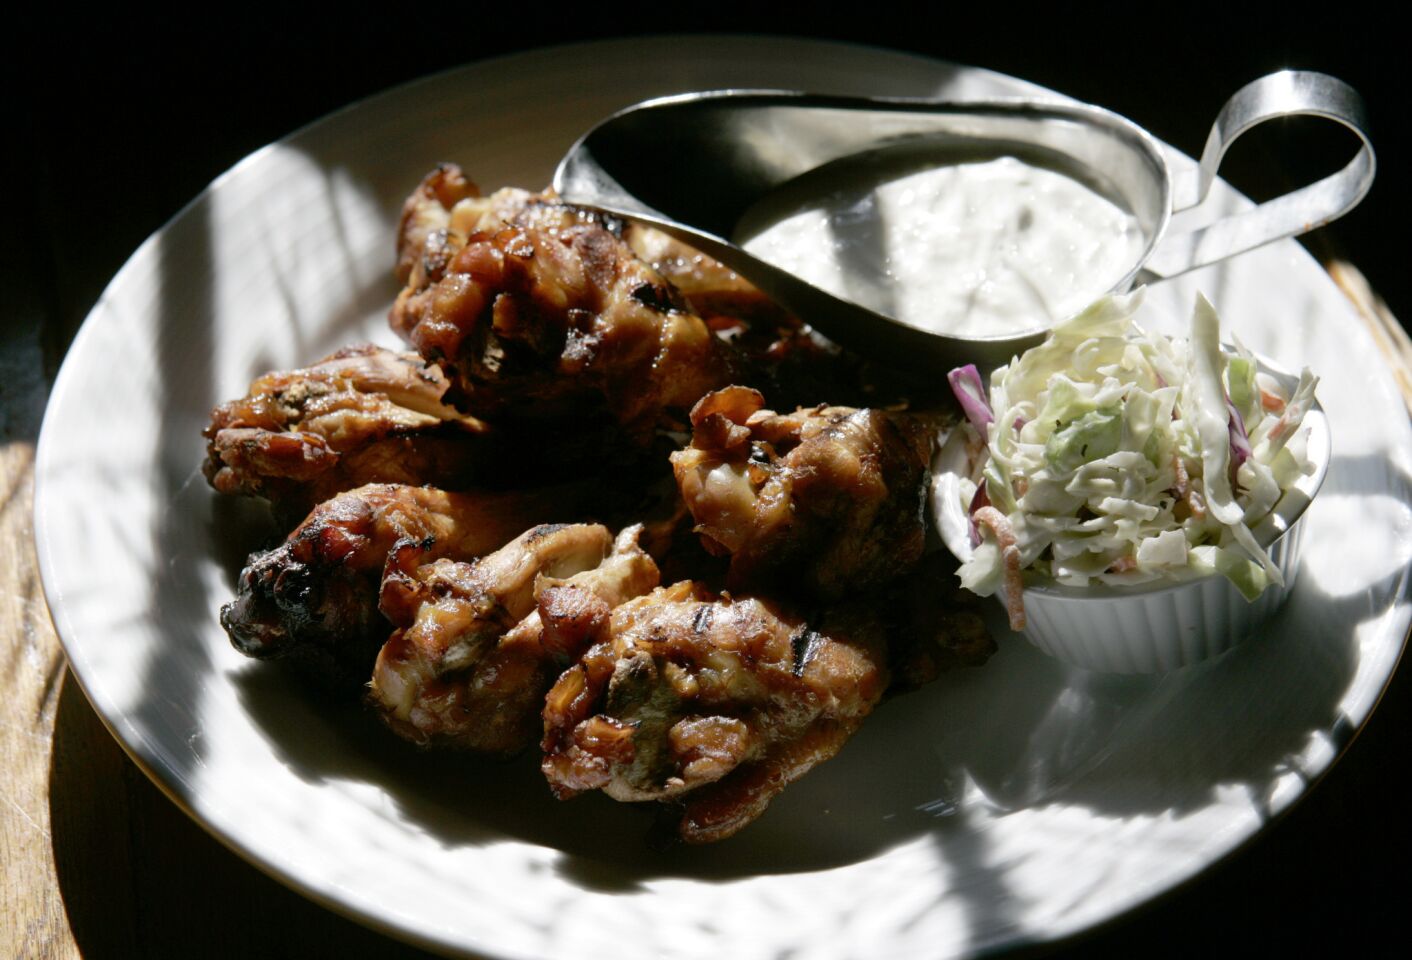 Muldoon's Irish Pub in Newport Beach features whiskey-marinated chicken wings with blue cheese dressing.